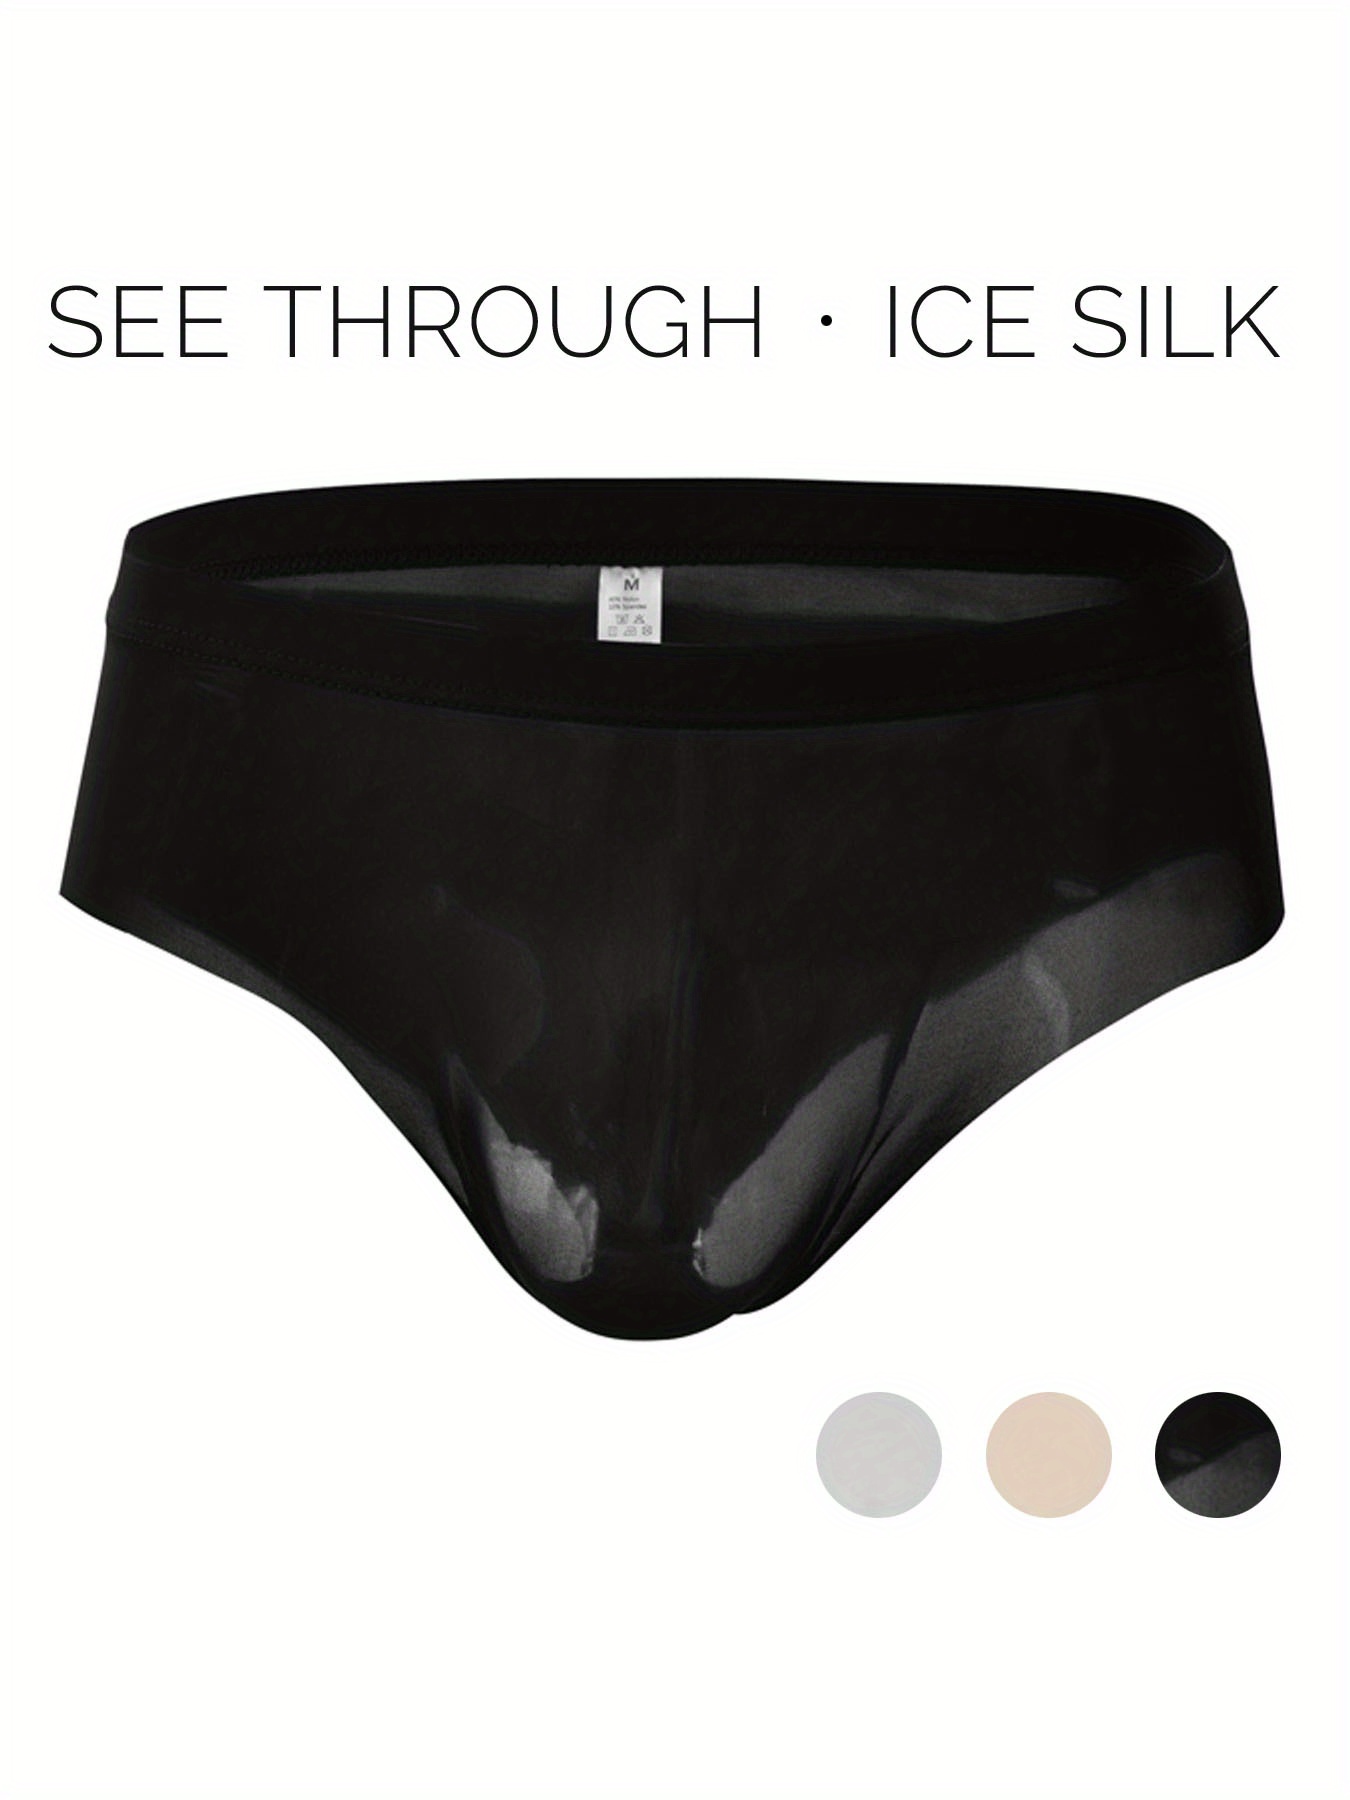 Ice Silk Briefs Men Low-rise Sexy Underwear Breathable Underpants  See-through*